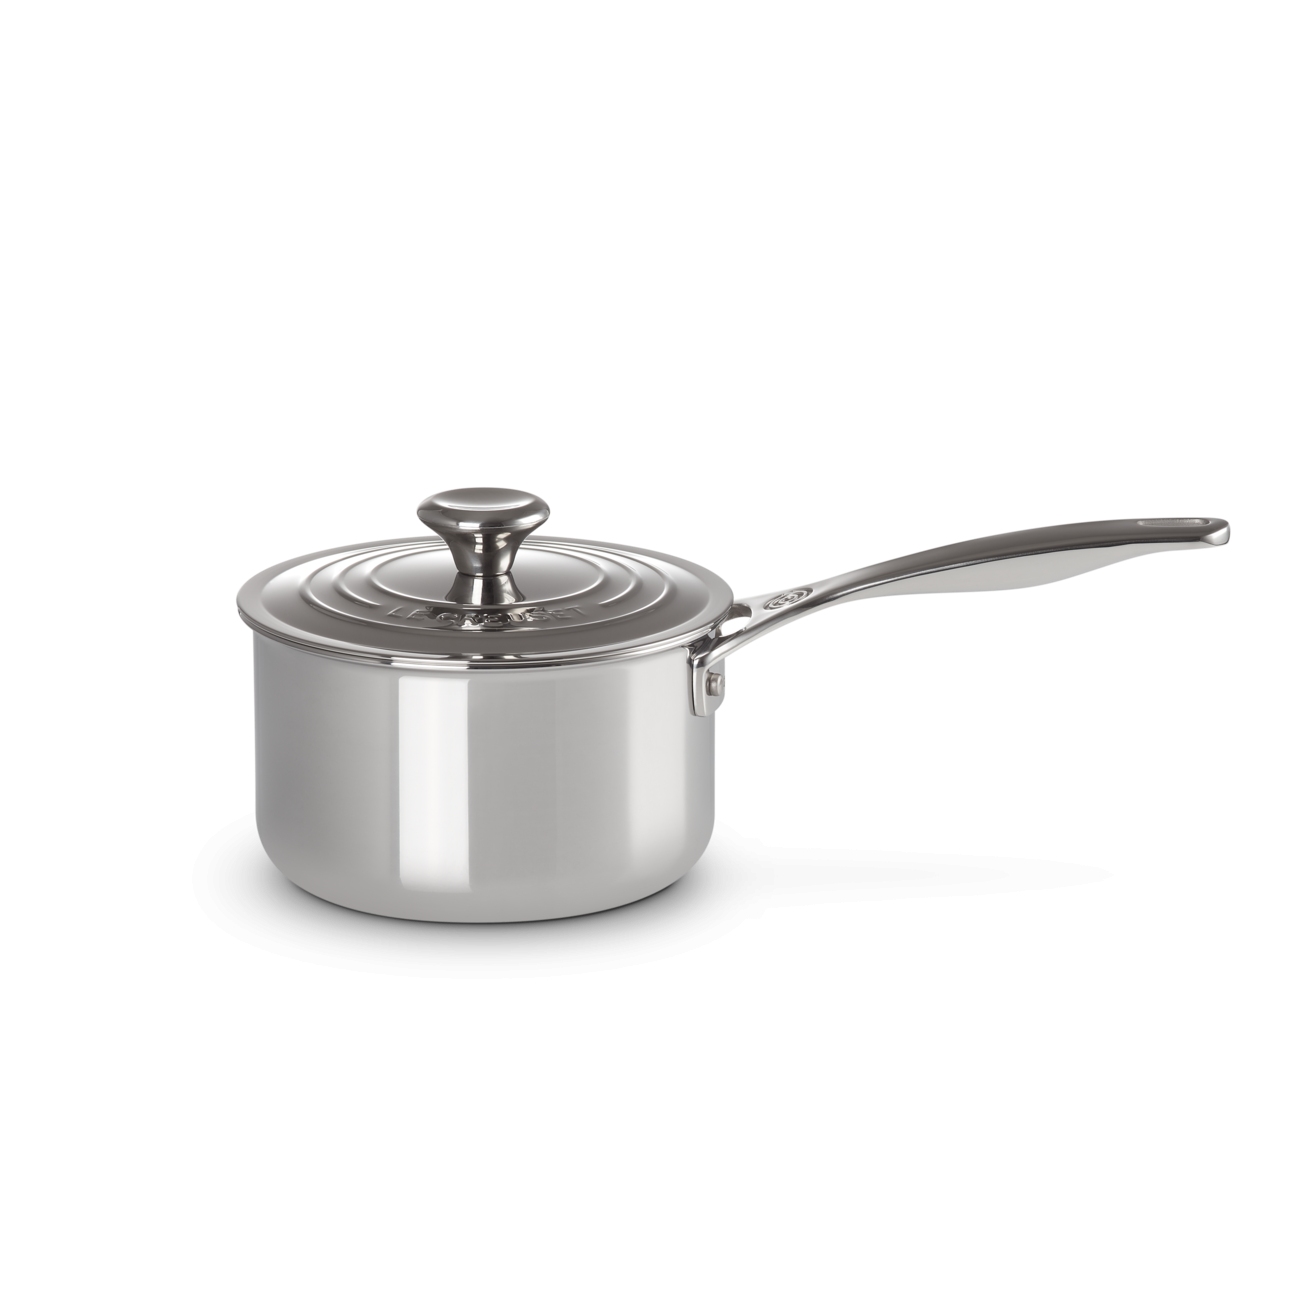 https://www.tattahome.com/53090-large_default/le-creuset-signature-stainless-steel-saucepan-with-lid-18.jpg